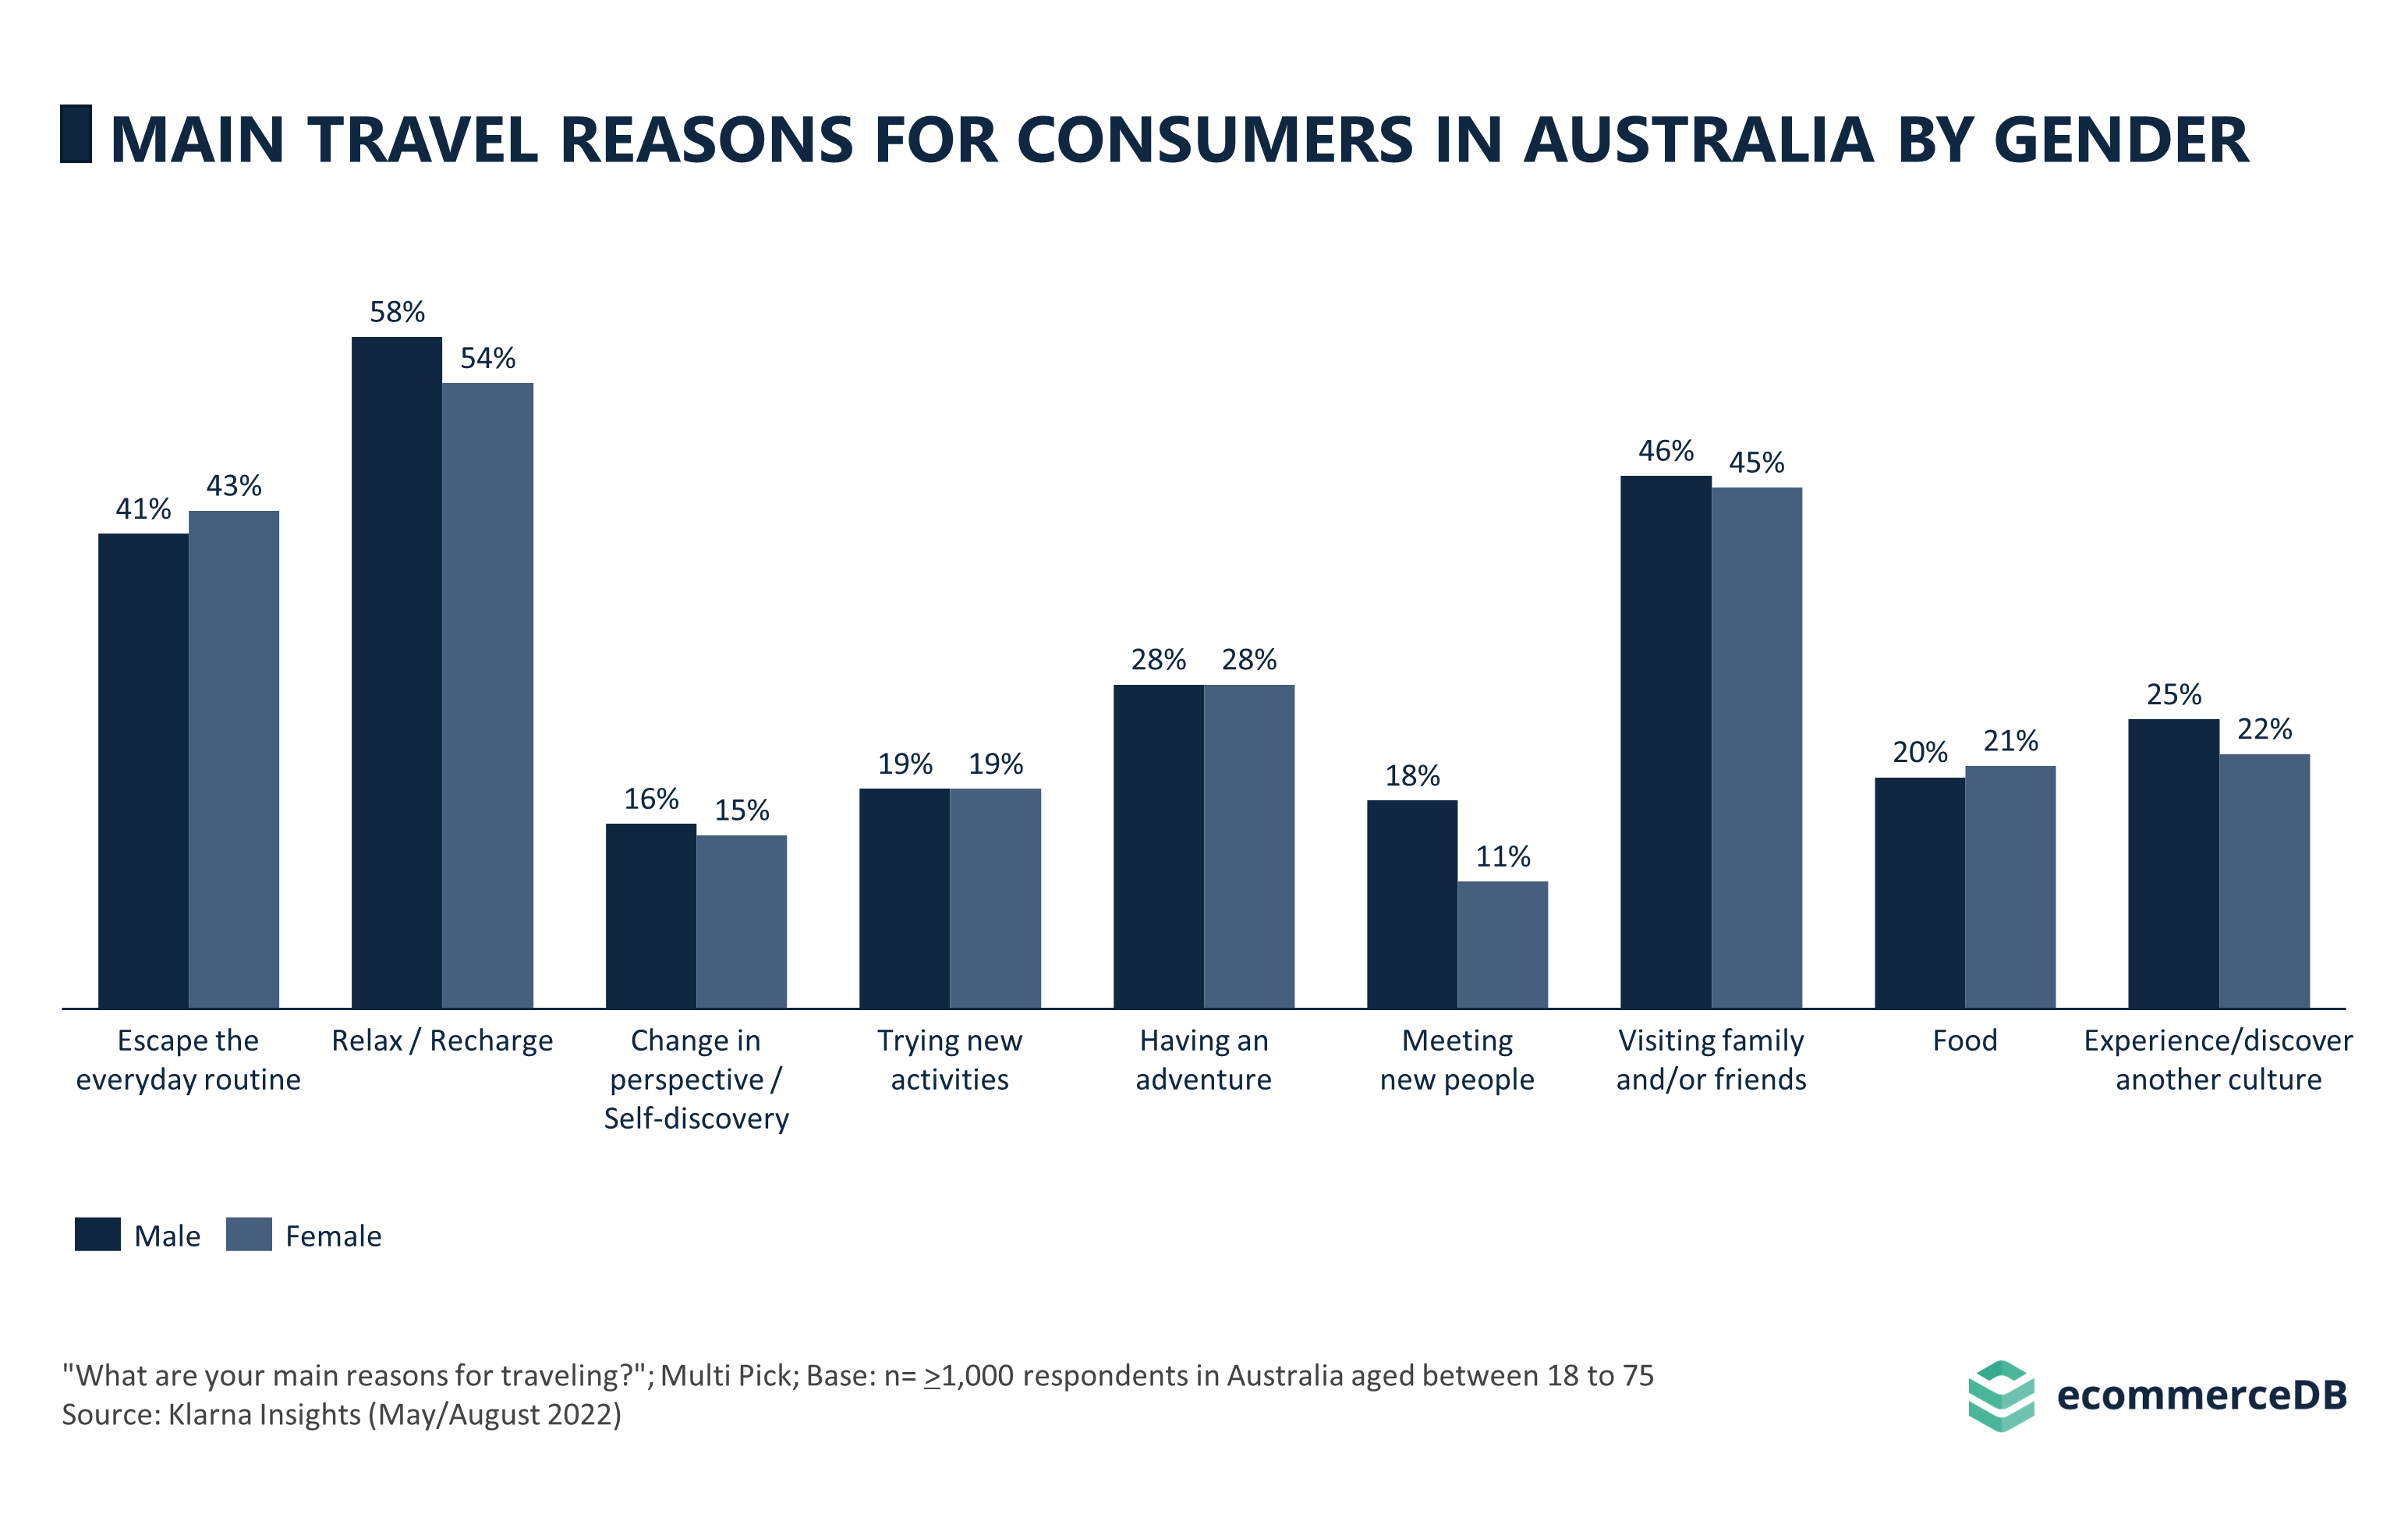 Main Travel Reasons for Consumers in Australia by Gender